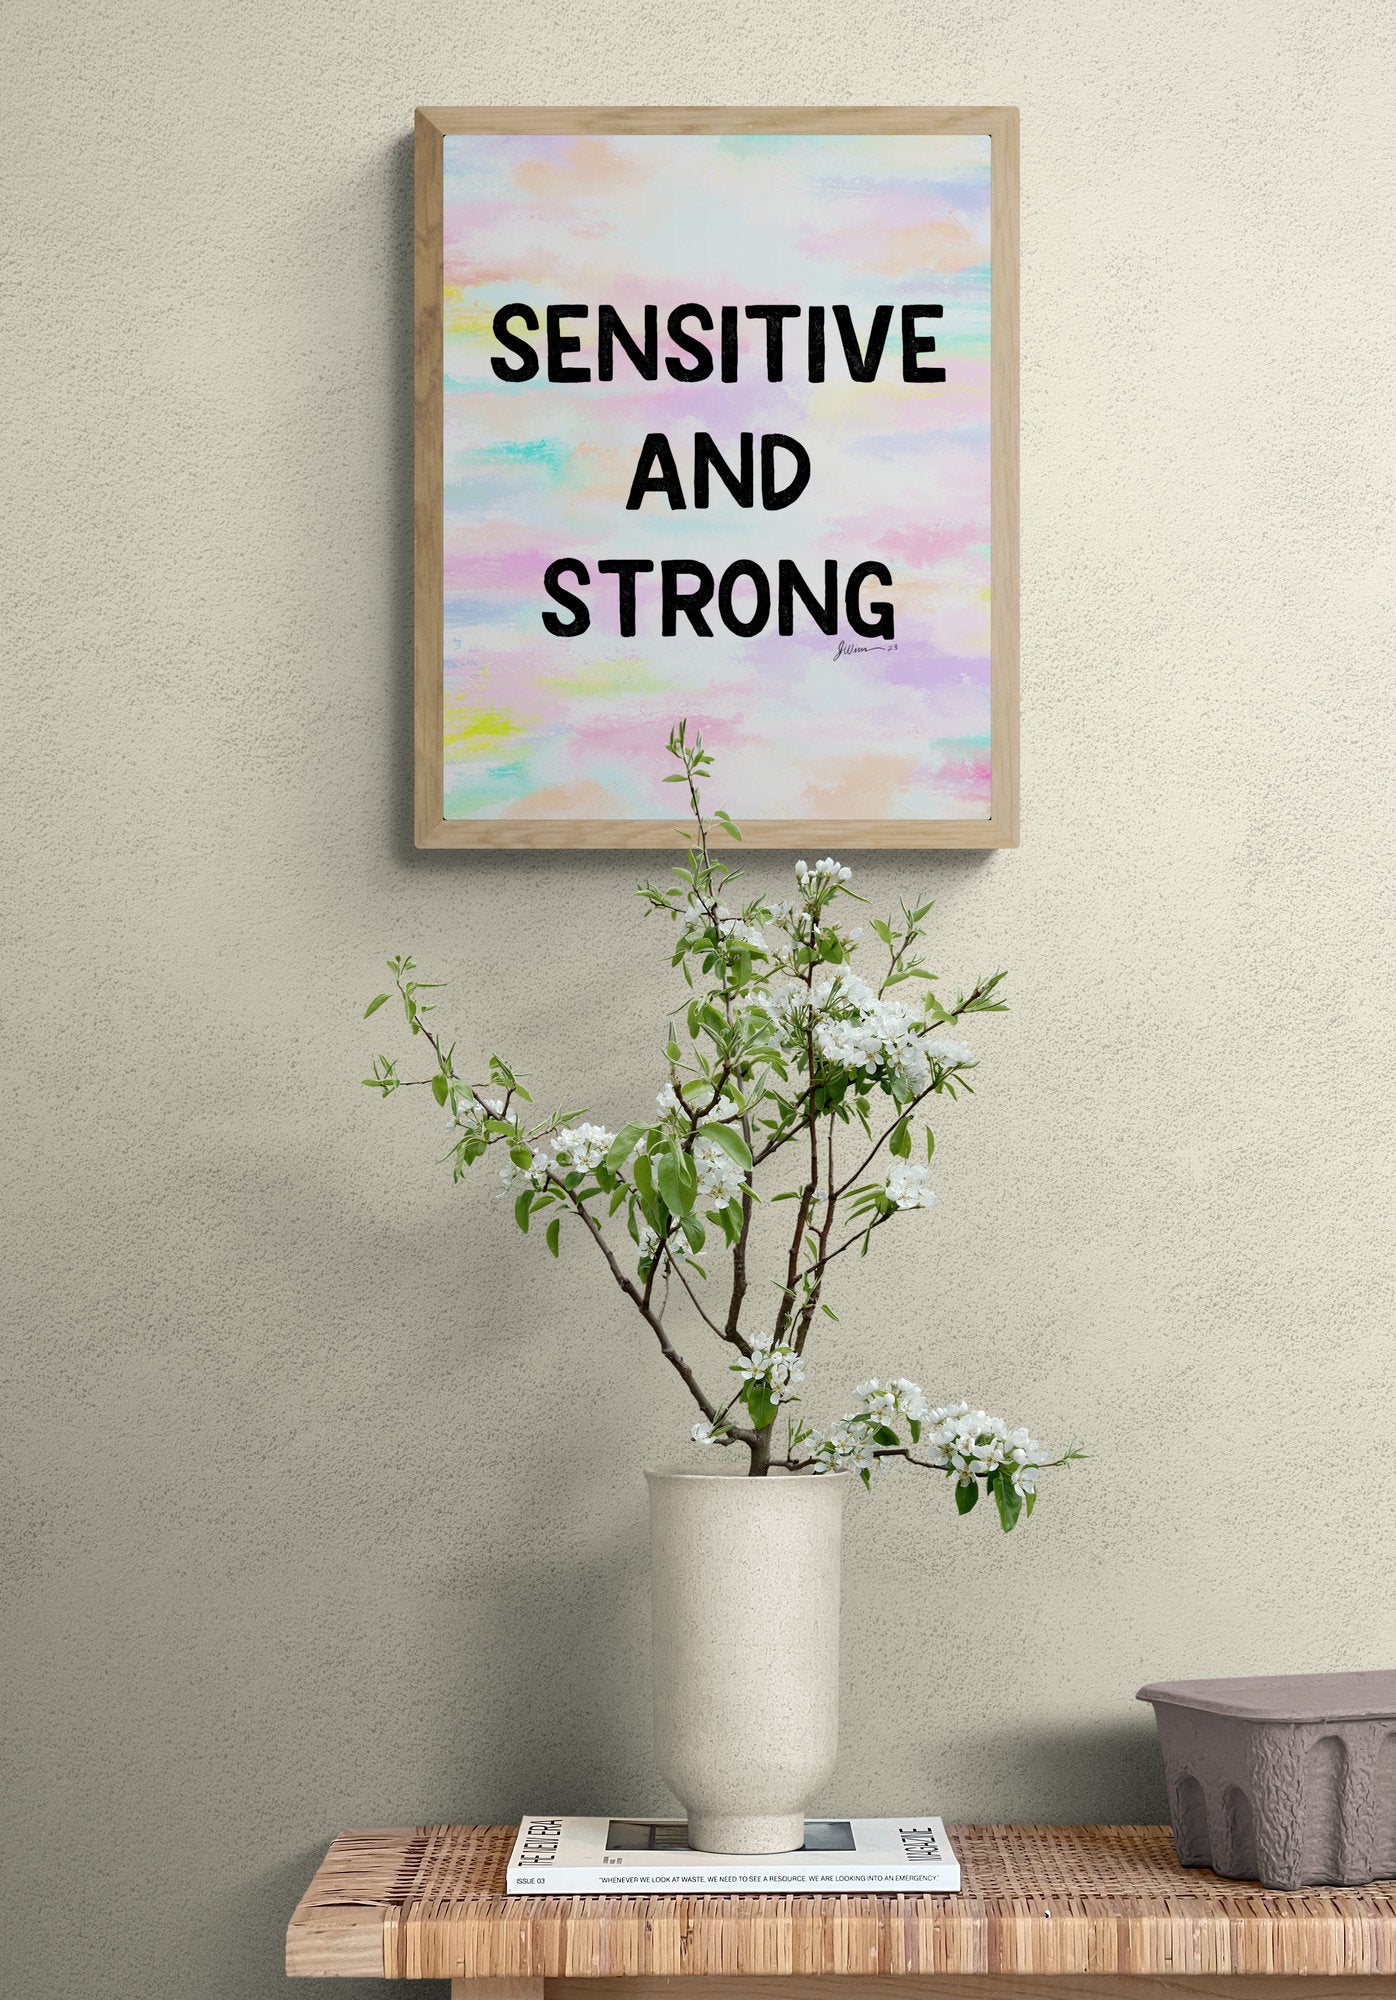 Sensitive and Strong Inspirational Giclée Art Print 8” x 10” with Colorful Abstract Background